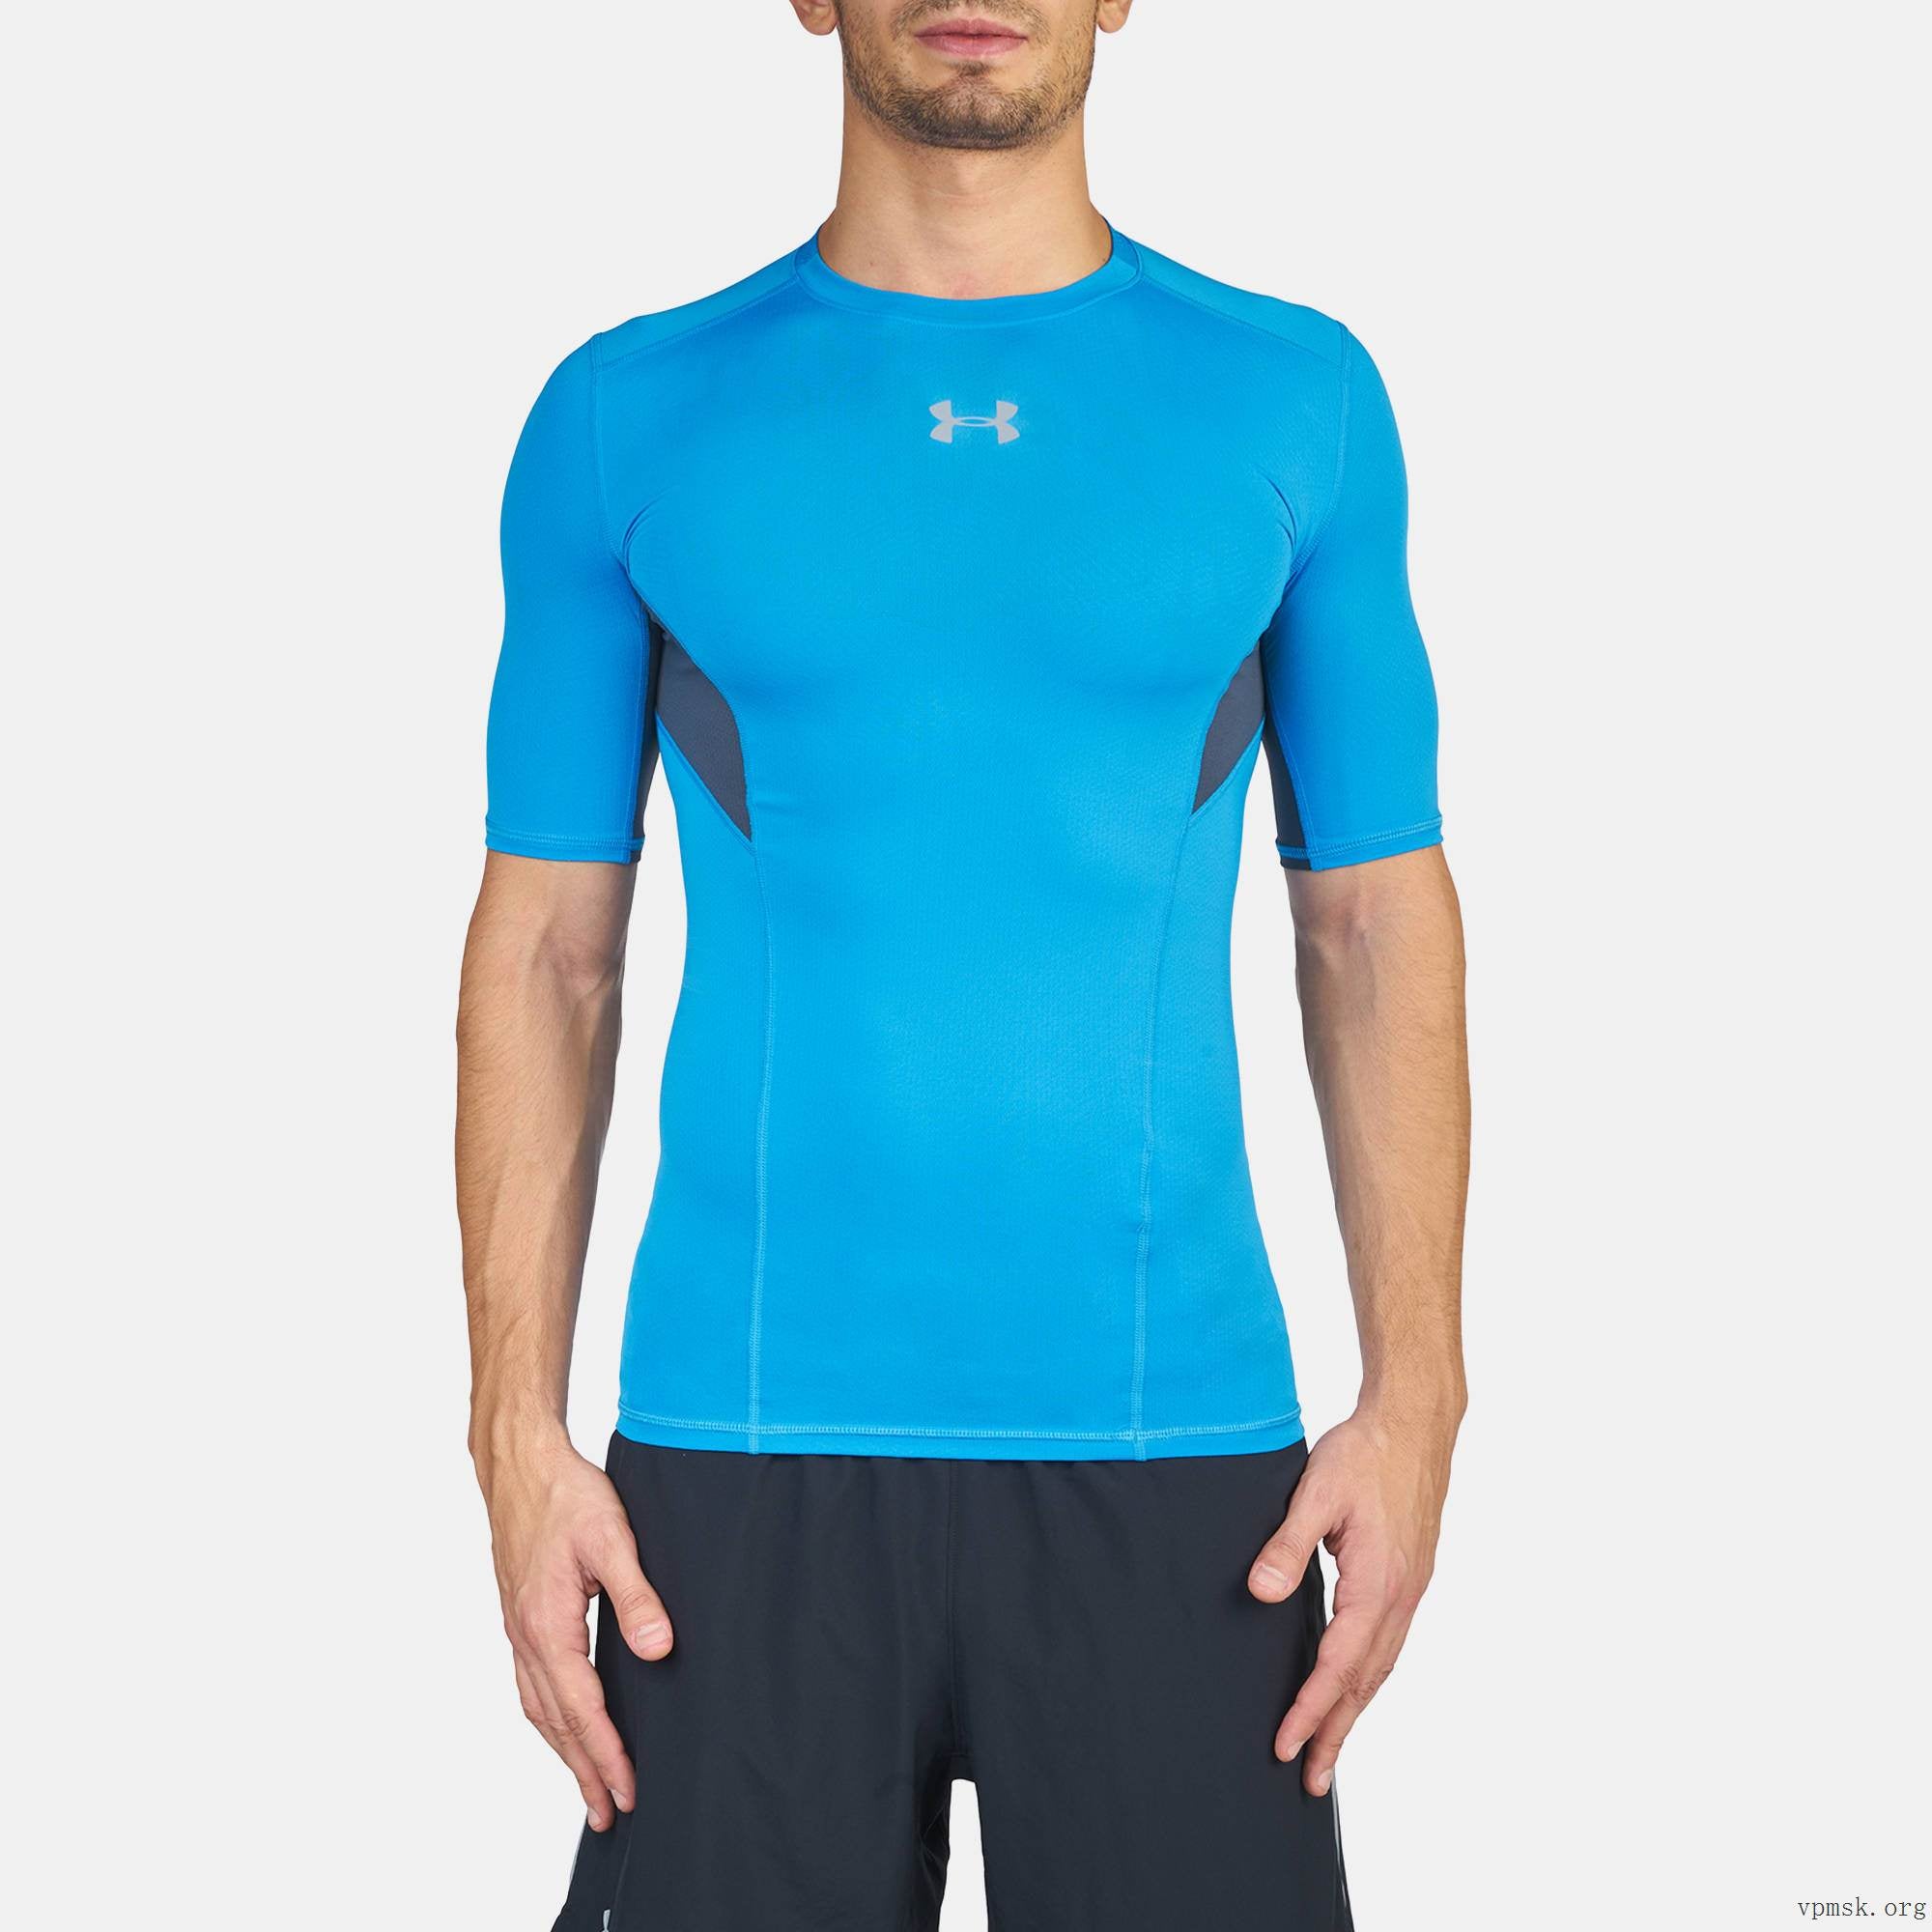 Under Armour Men's HeatGear CoolSwitch Compression Short Sleeve